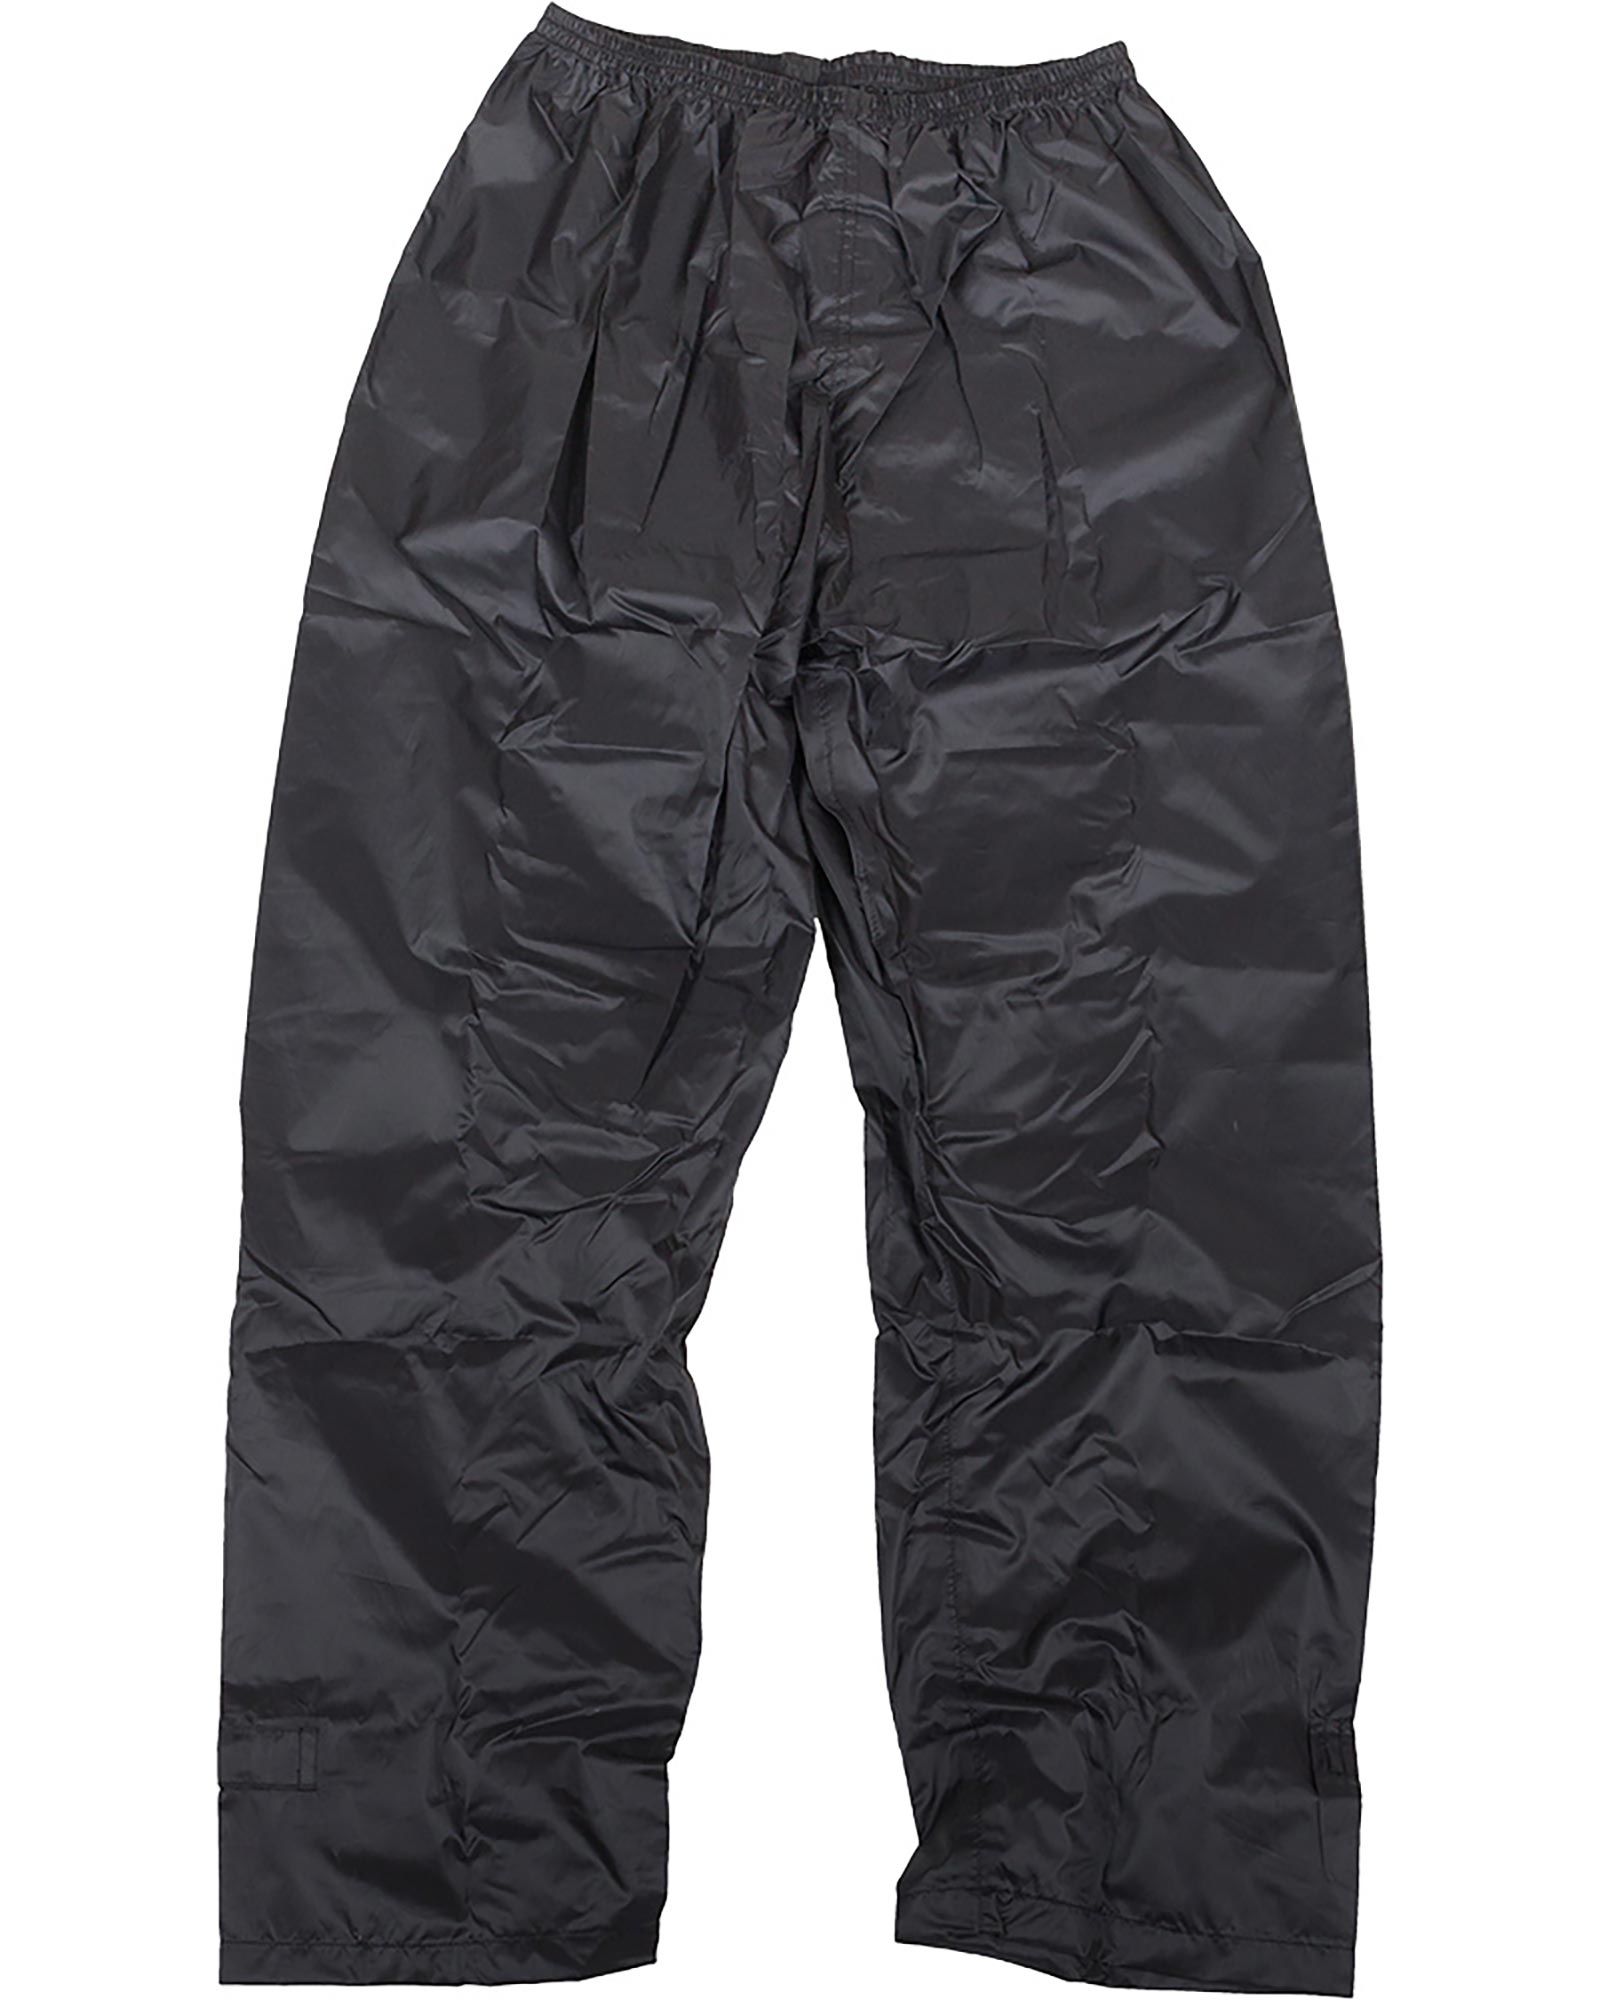 Product image of Target Dry Mac in a Sac Adult Packable Waterproof Overtrousers